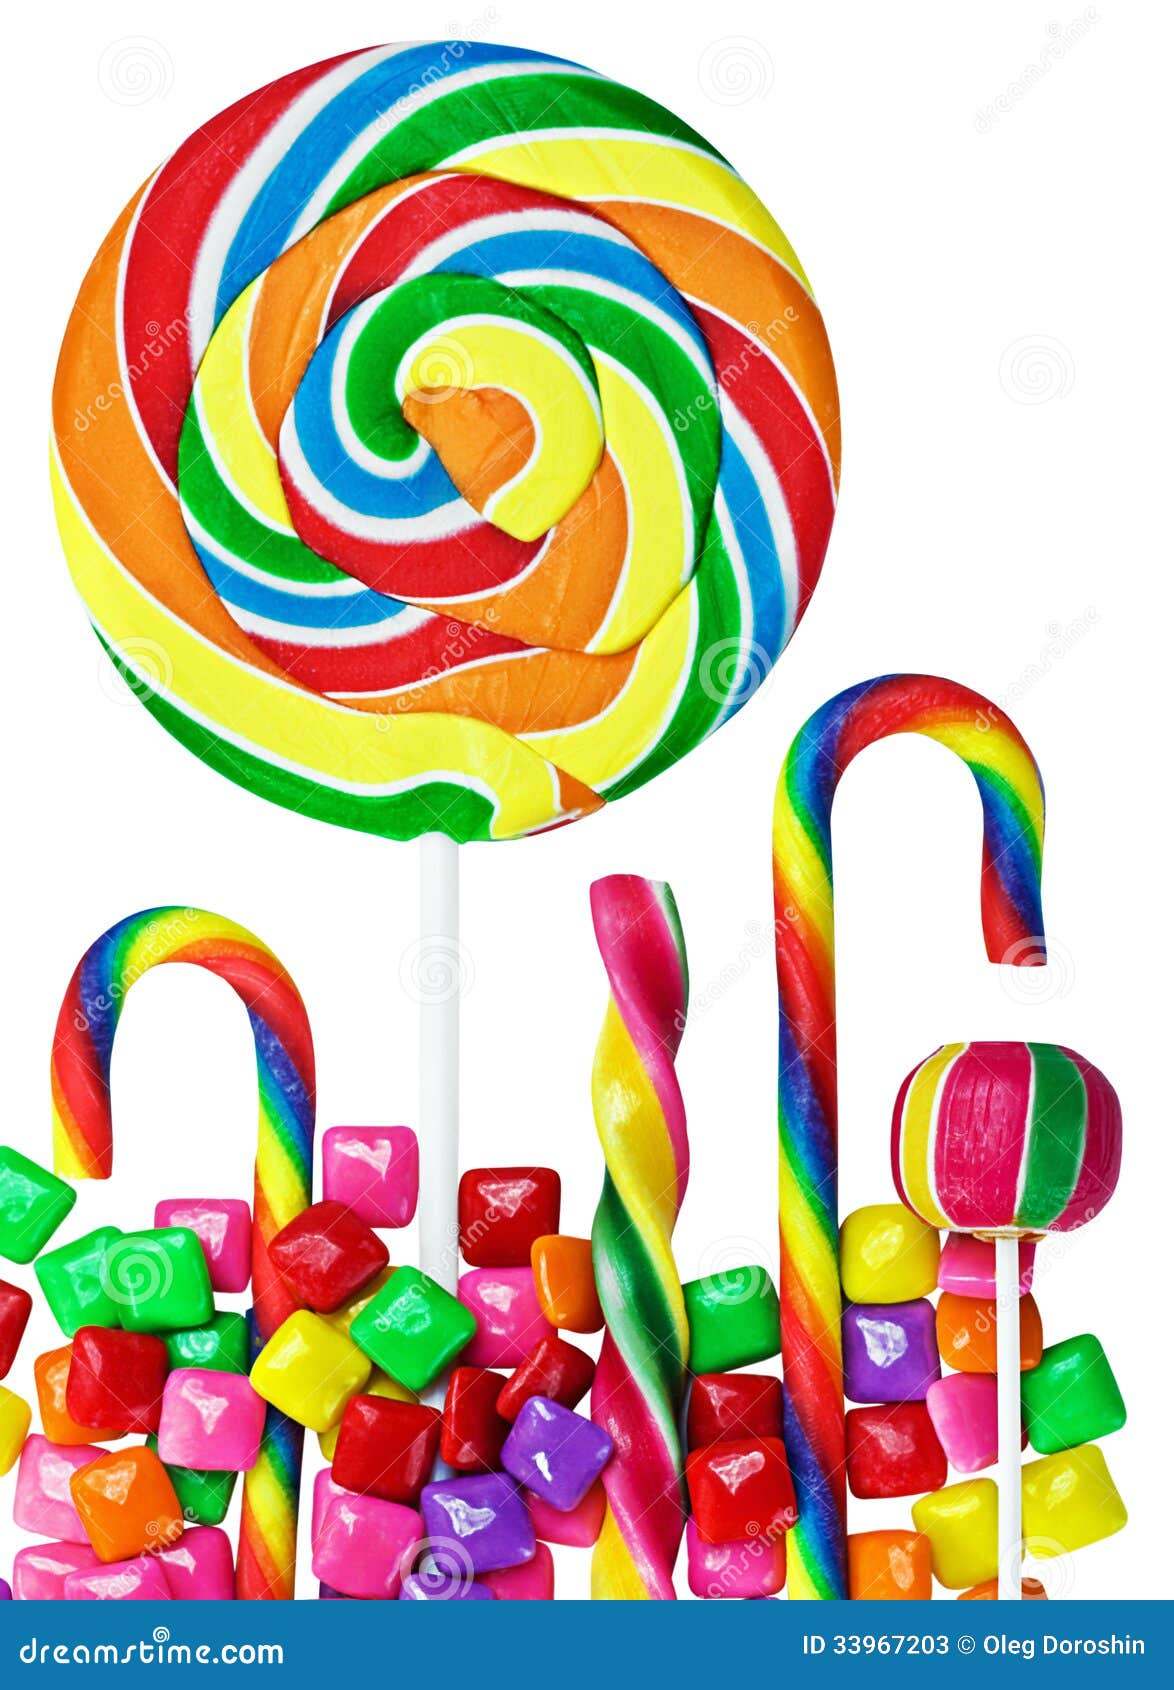 colorful candies and sweets 